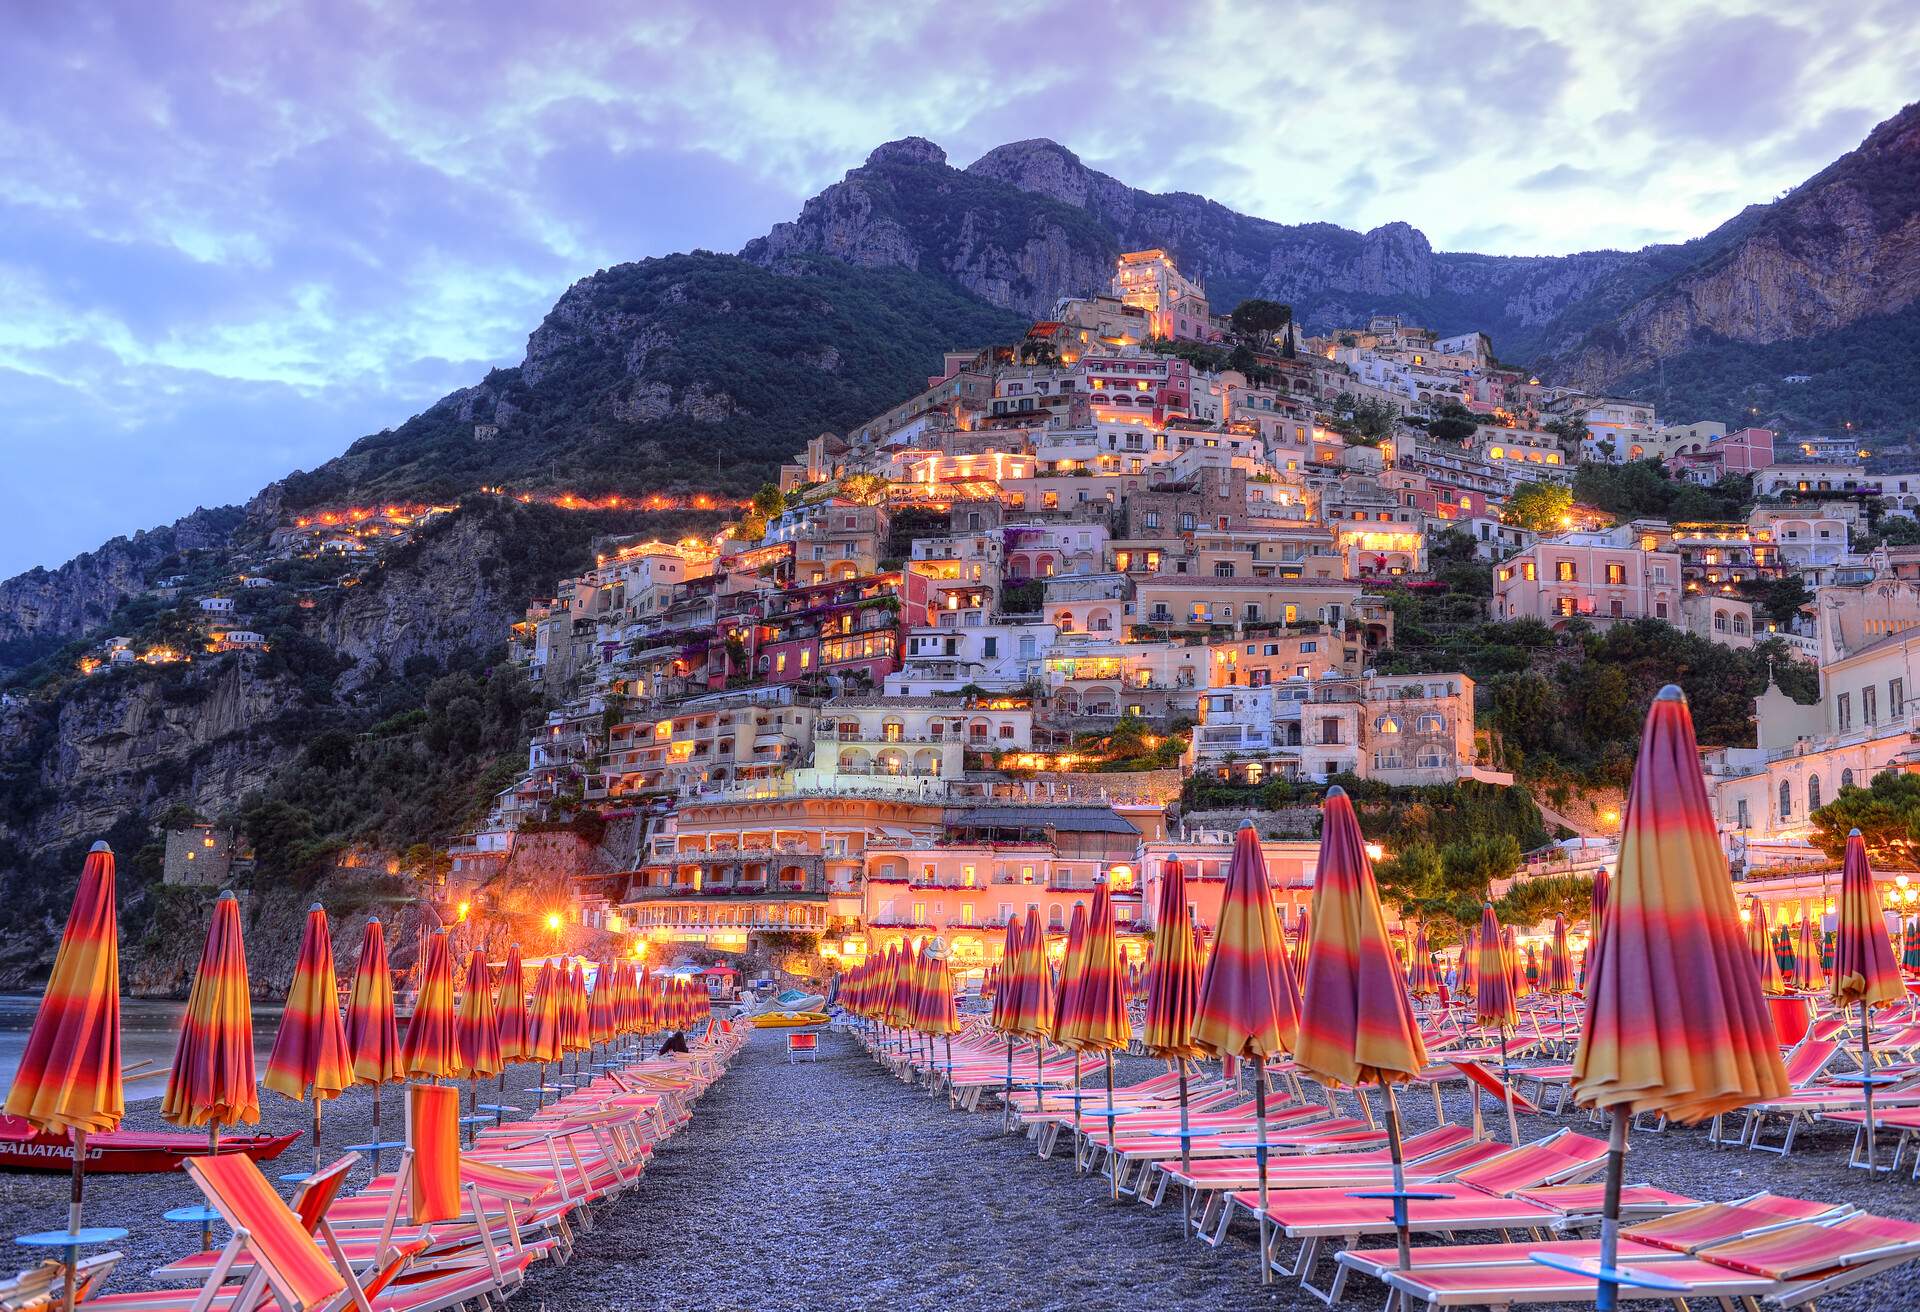 Illuminated, colourful, compact houses on the mountainside descend towards a beach packed with sunbeds and umbrellas.